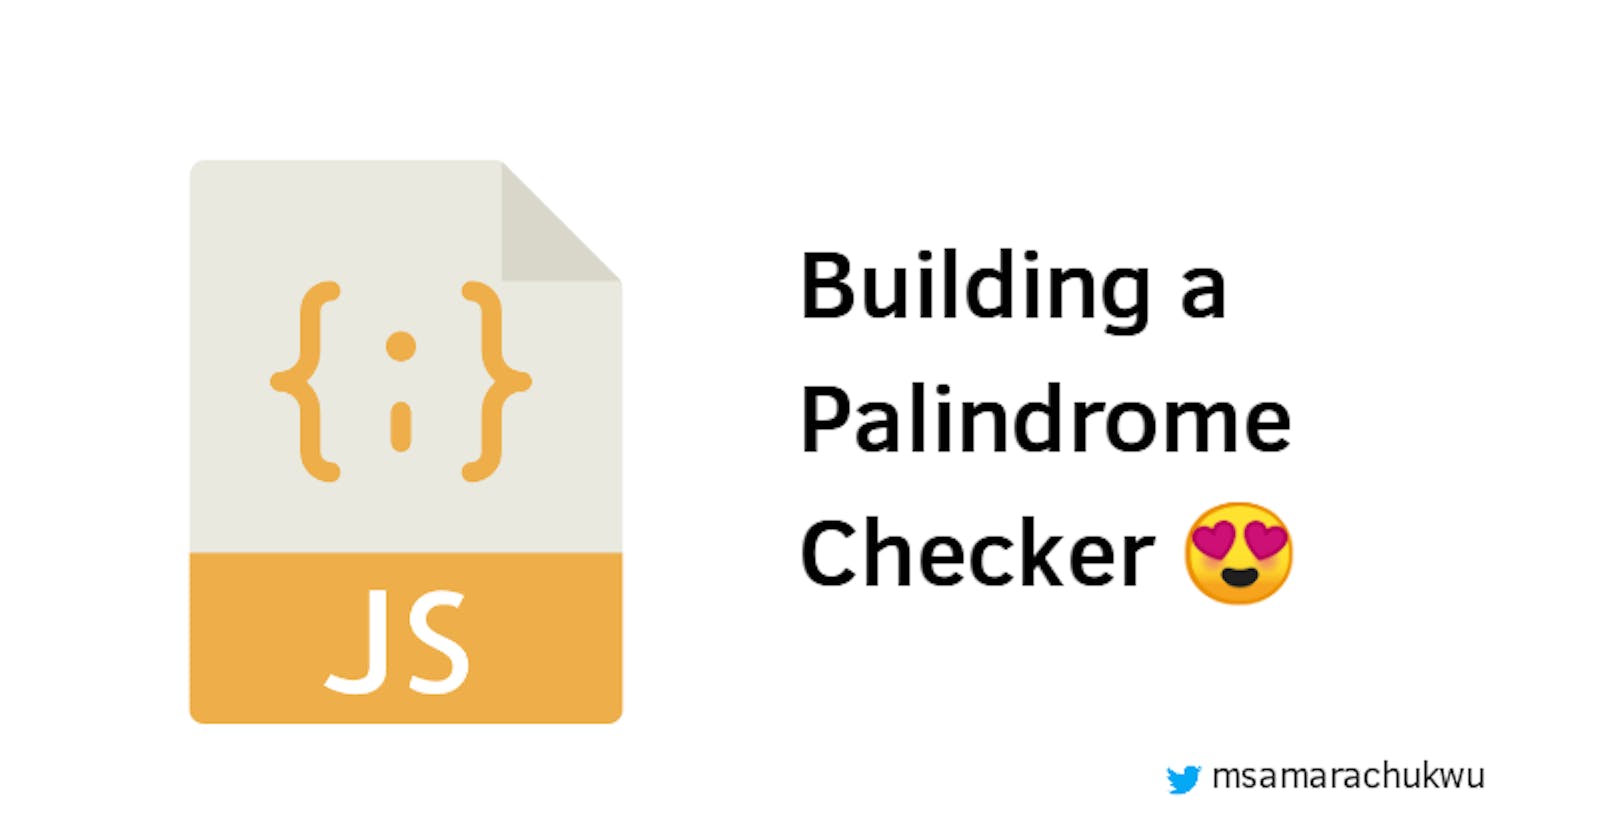 Building a Palindrome Checker using Split, Join and replace methods